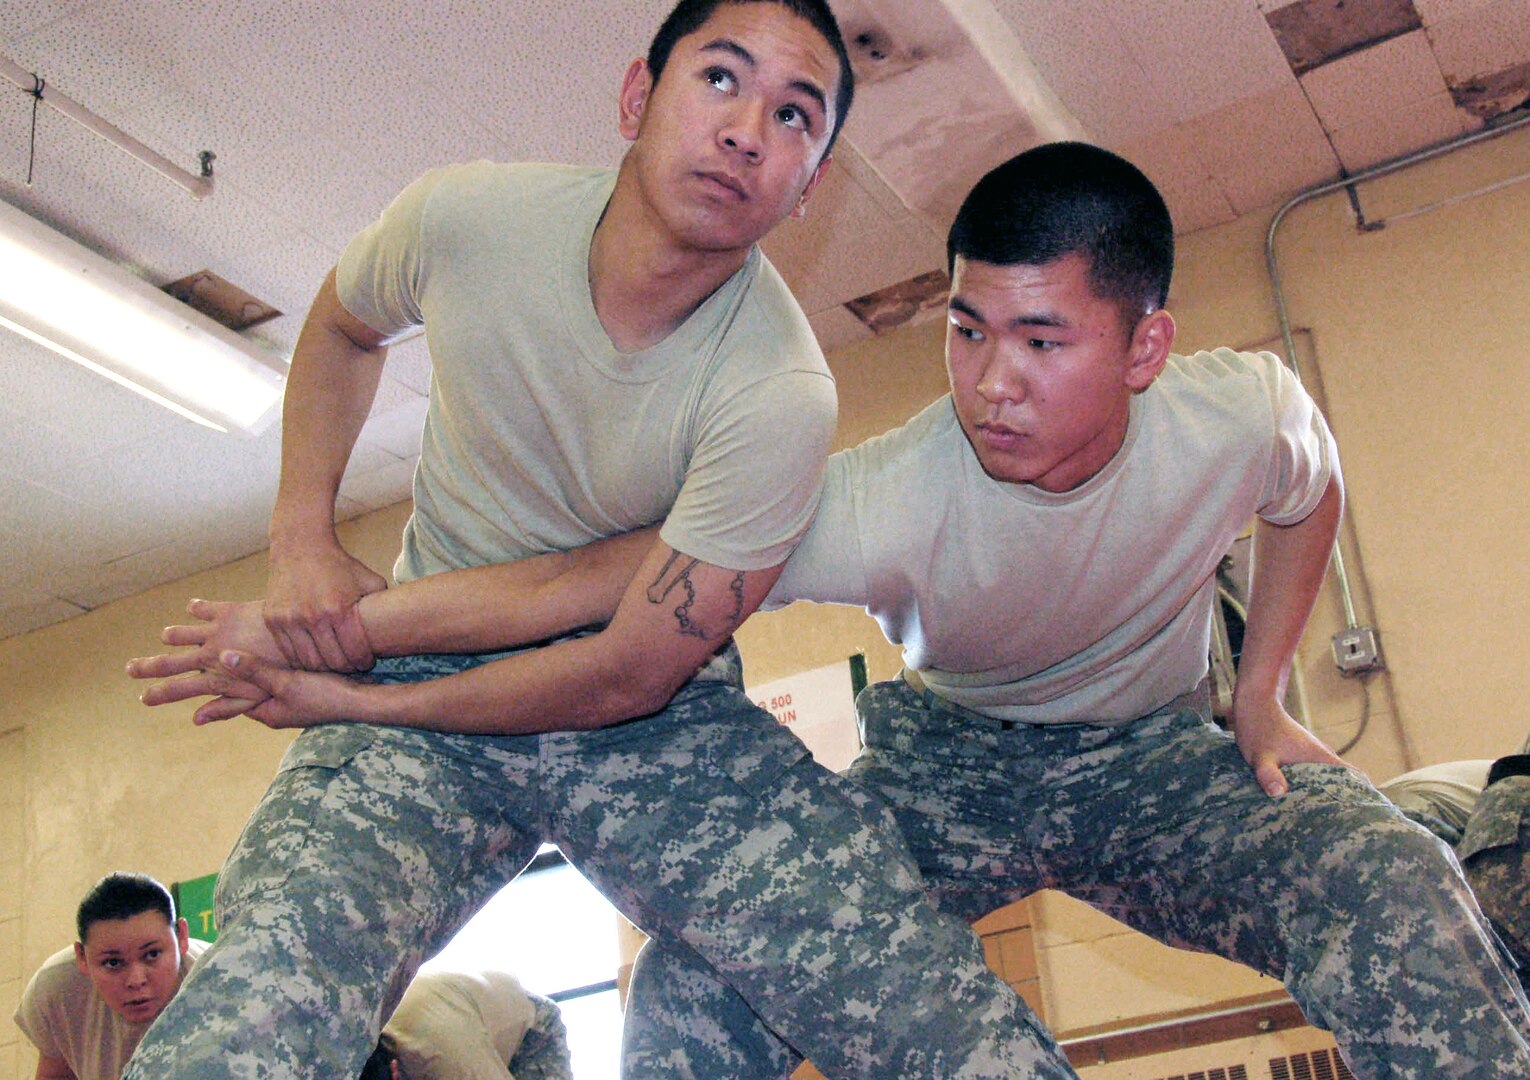 Army Pfc. Ji Chong, left, listens to an instructor while putting a submission hold on Army Pfc. Andrew Bituin during a nonlethal weapons training class at Muscatatuck Urban Training Center near Camp Atterbury, Ind. The training, designed to induce compliance and control rather than injury, is part of deployment training for Chong and Bituin's unit, 40th Infantry Division, which is scheduled to deploy to Kosovo.